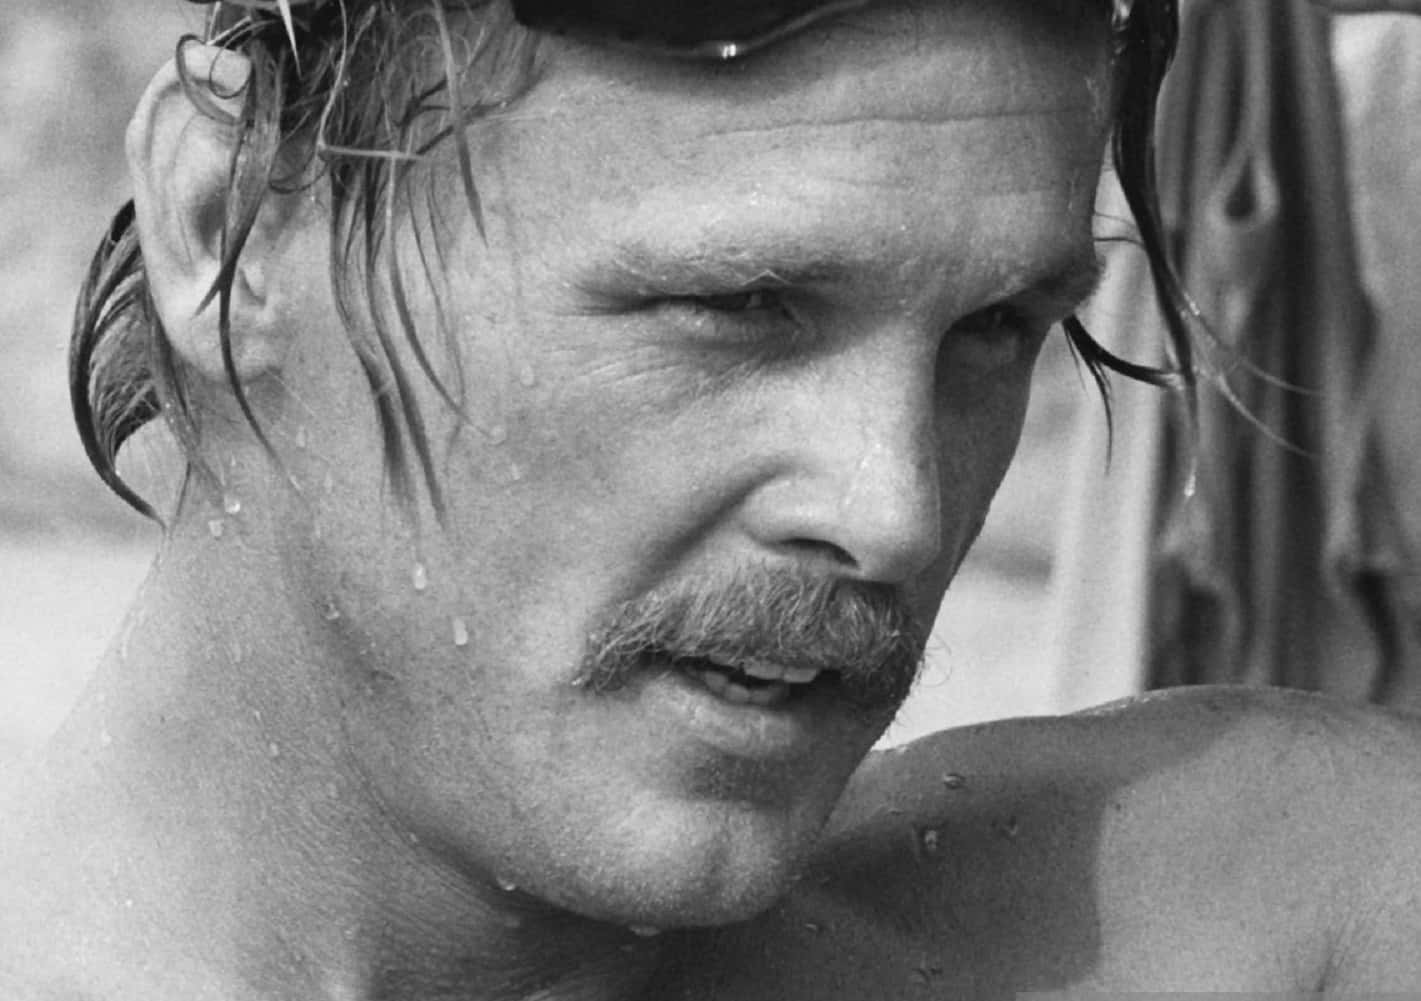 Nick Nolte facts